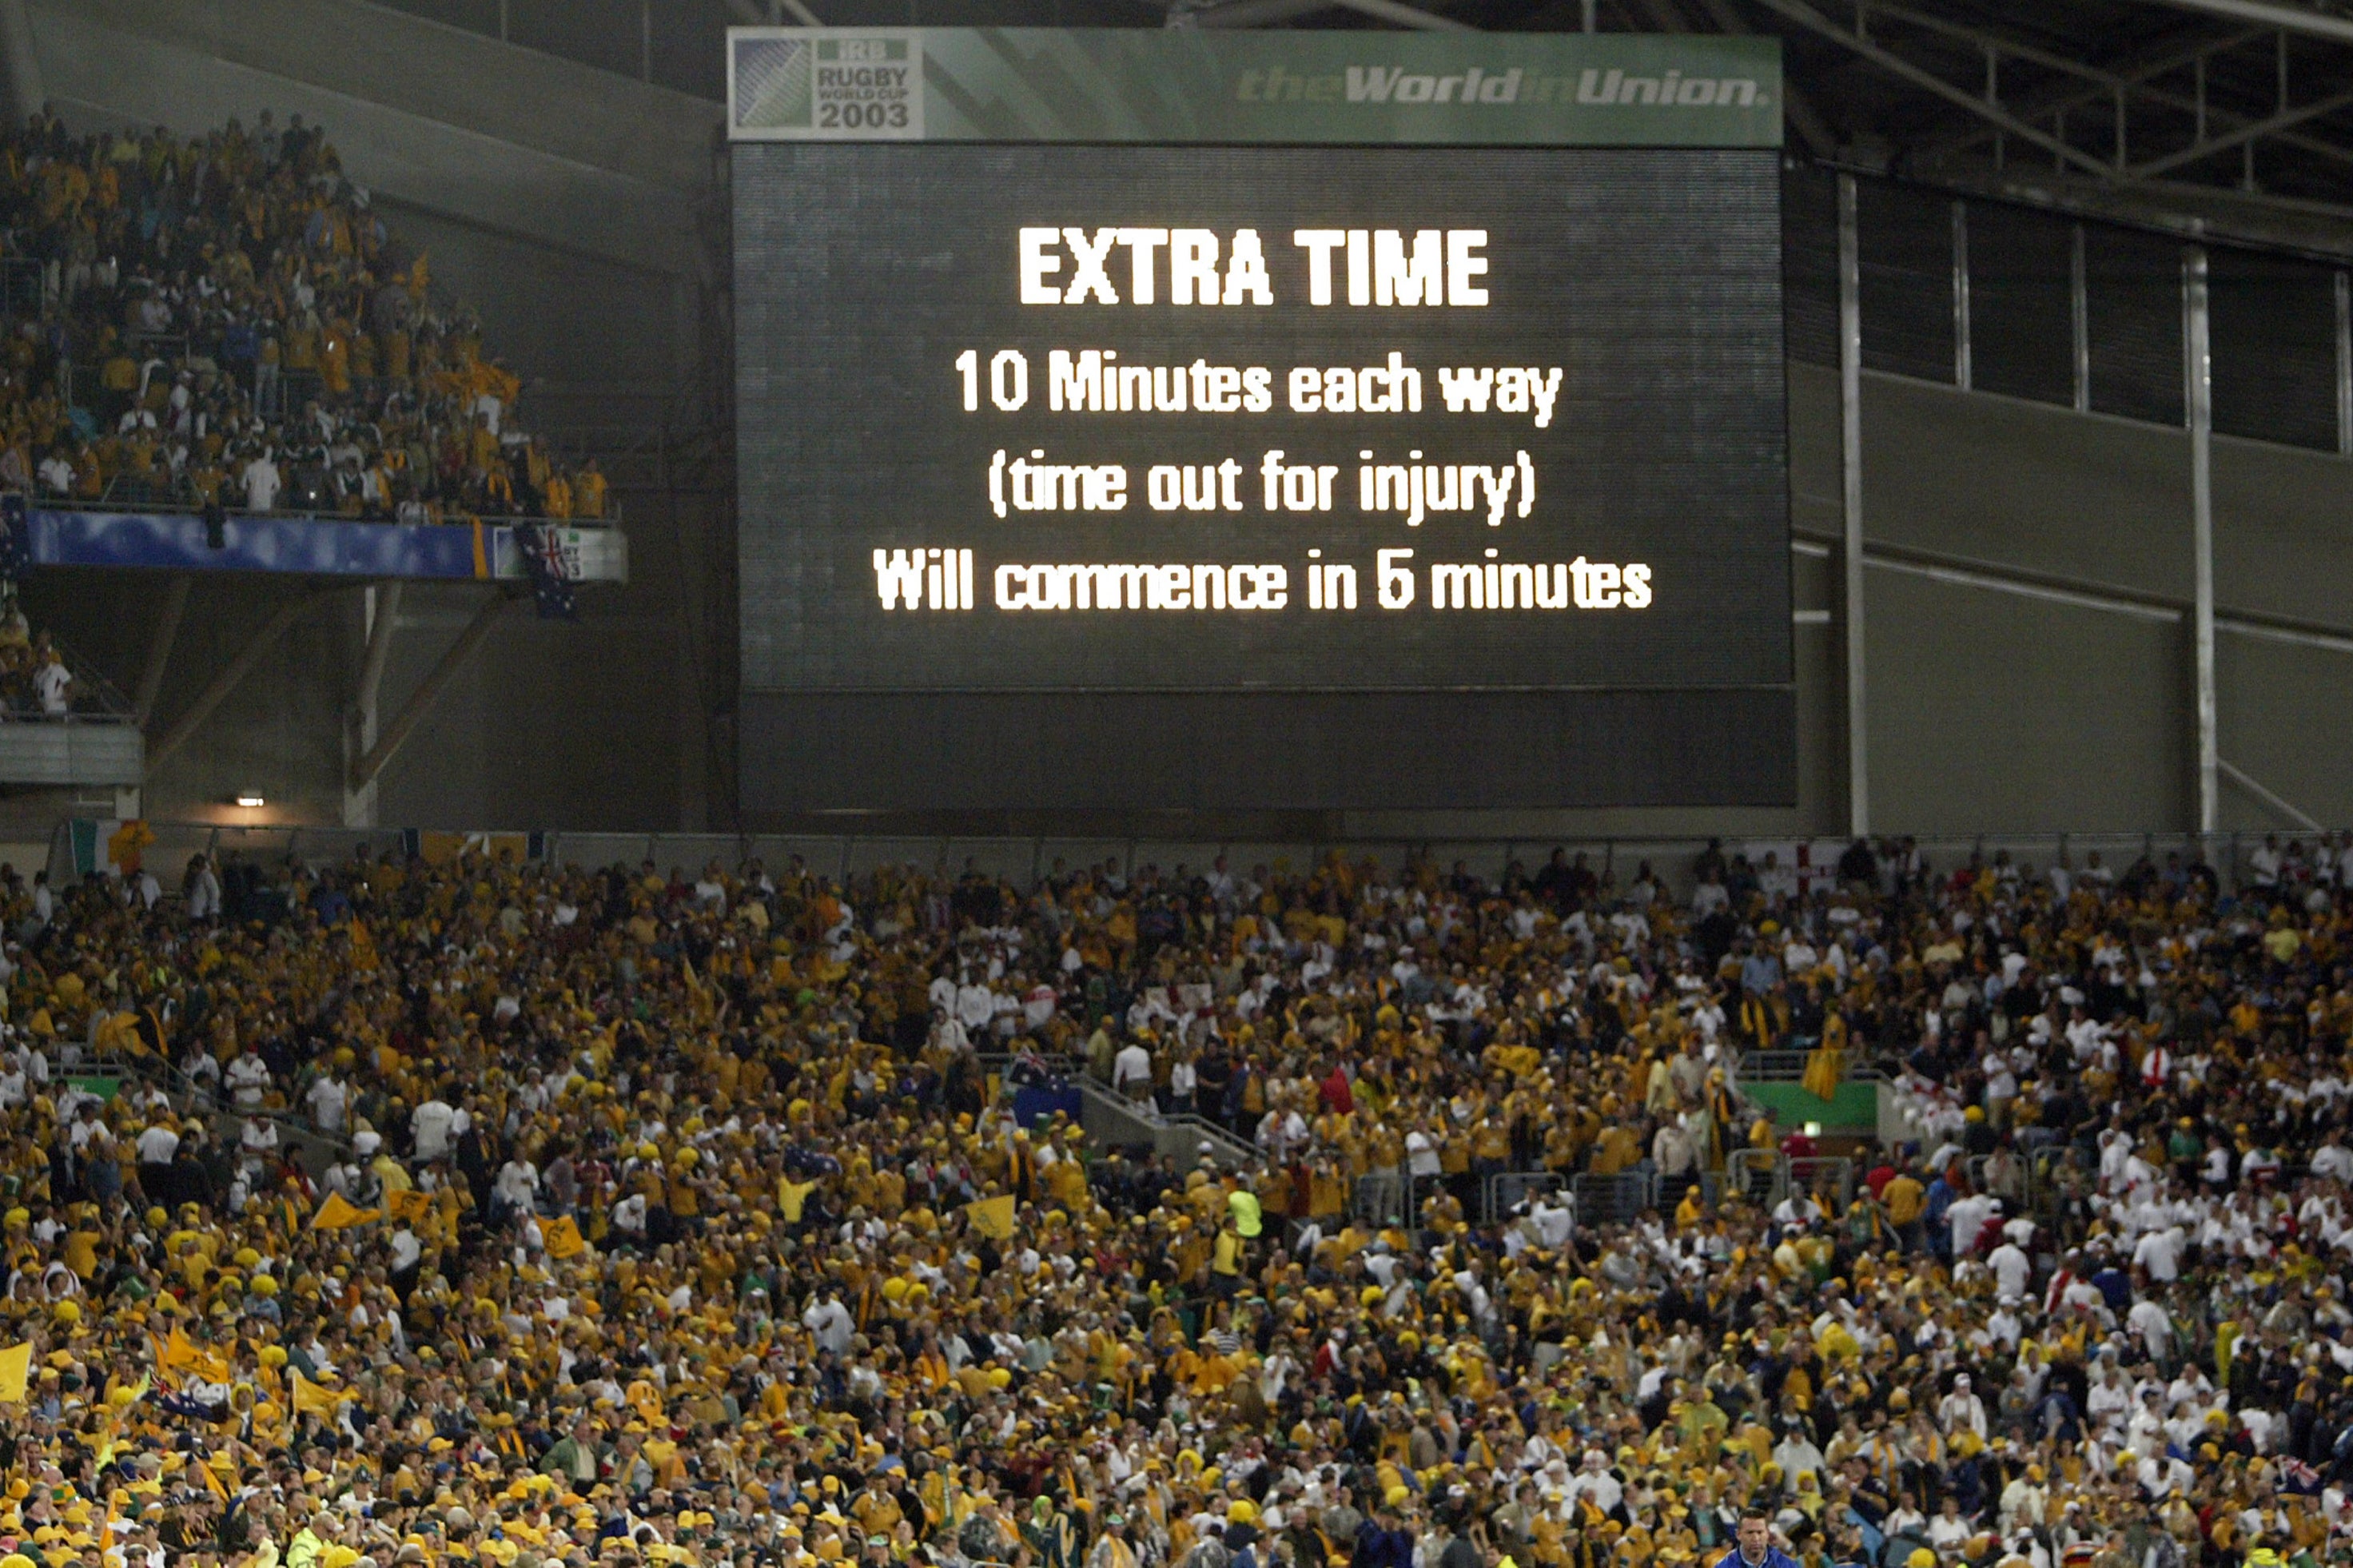 The 2003 Rugby World Cup final was decided in extra time